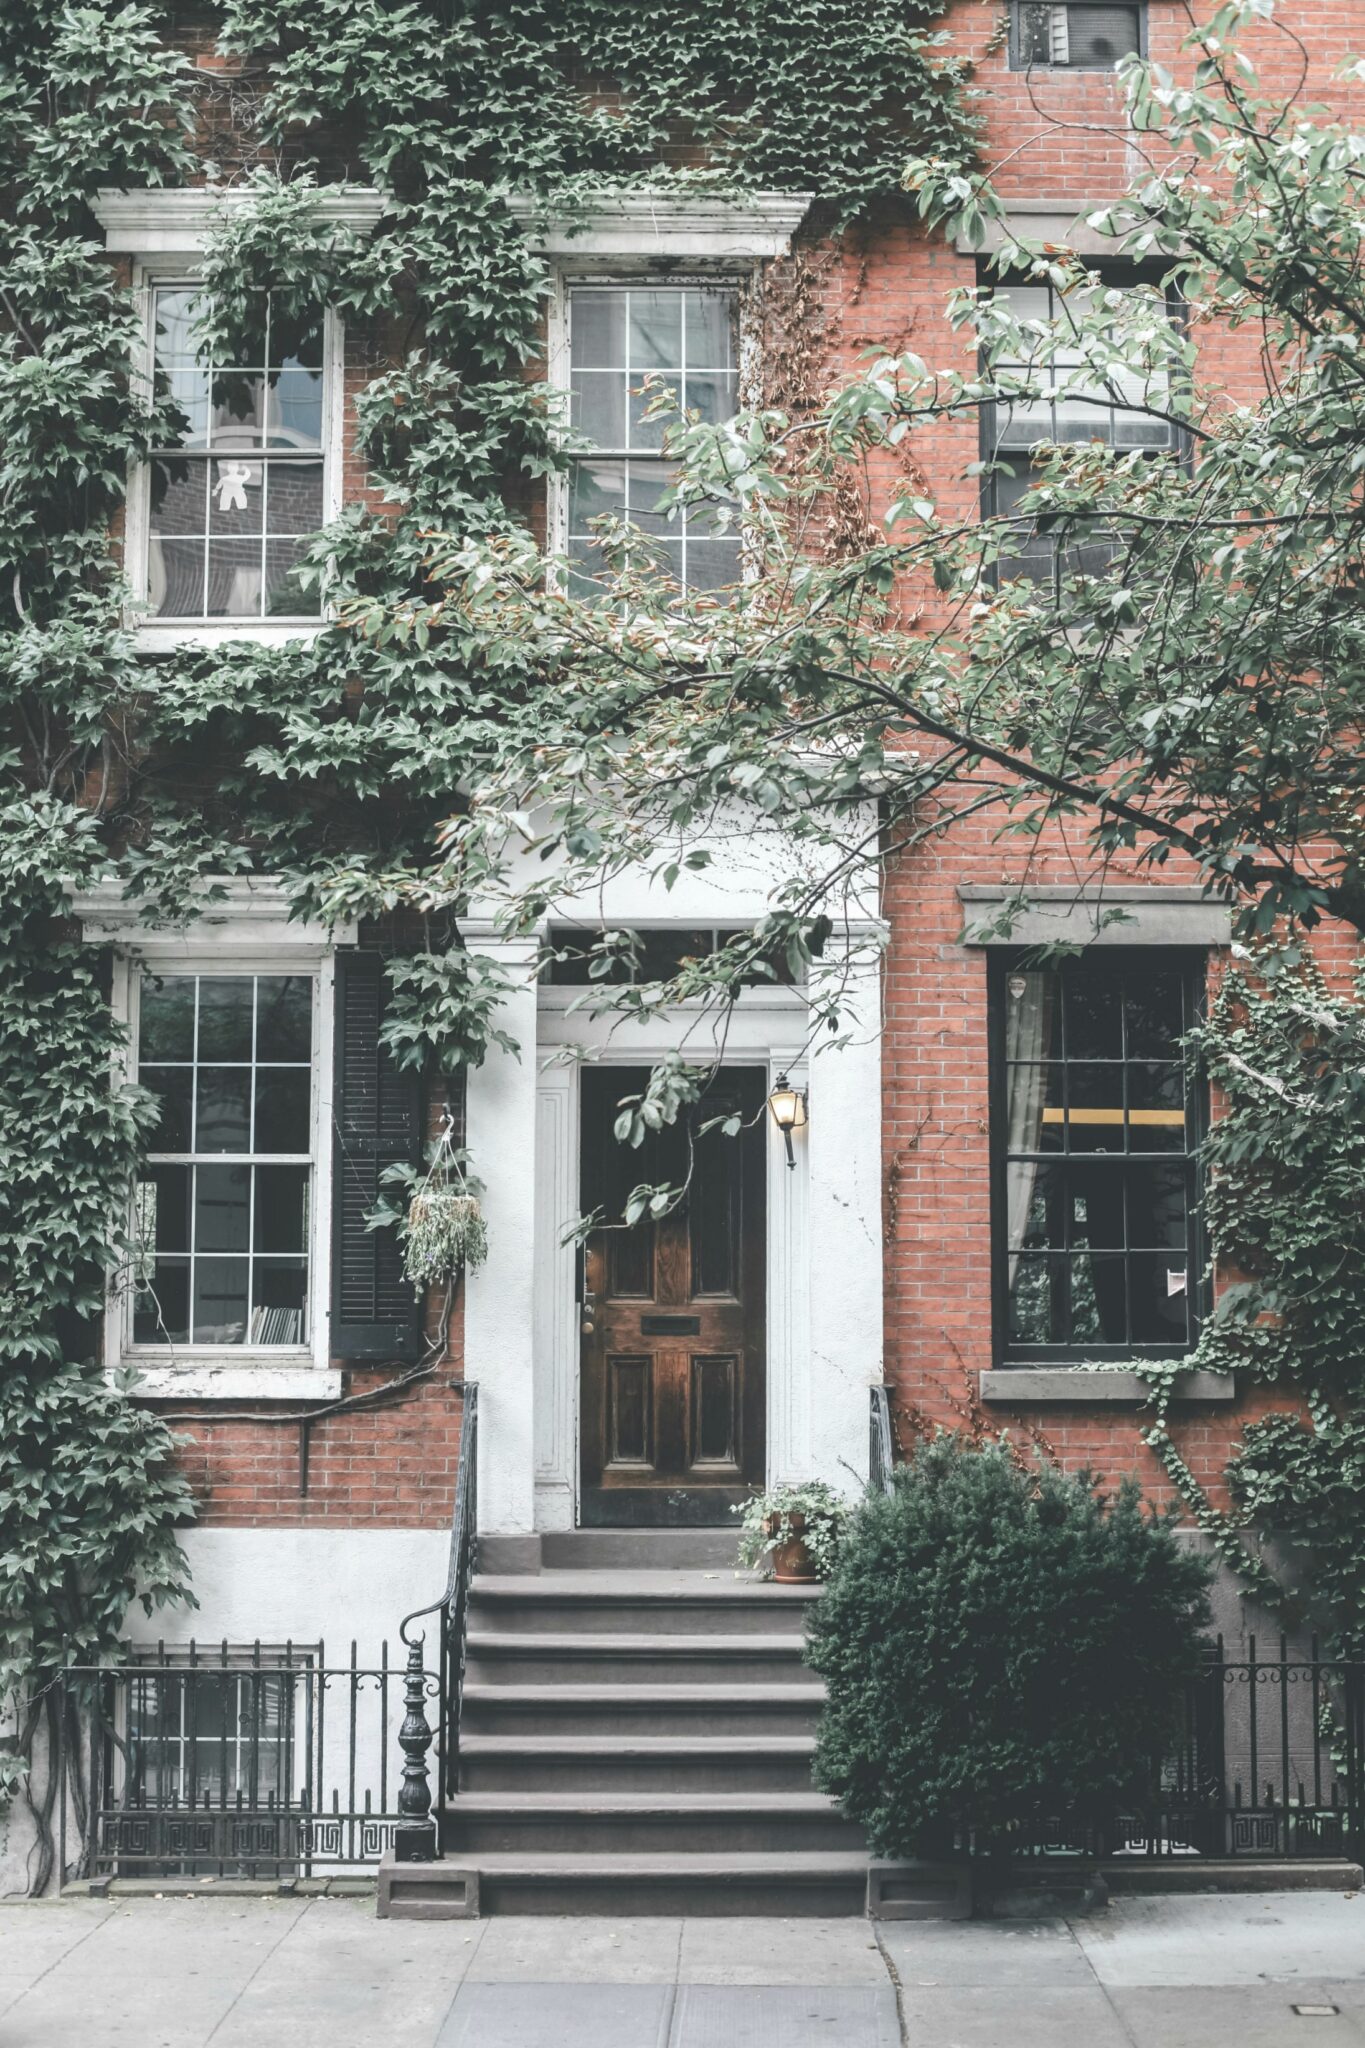 A beautiful home in the city. It has greenery growing all over it. This article is about costs you forget when you buy a new home.